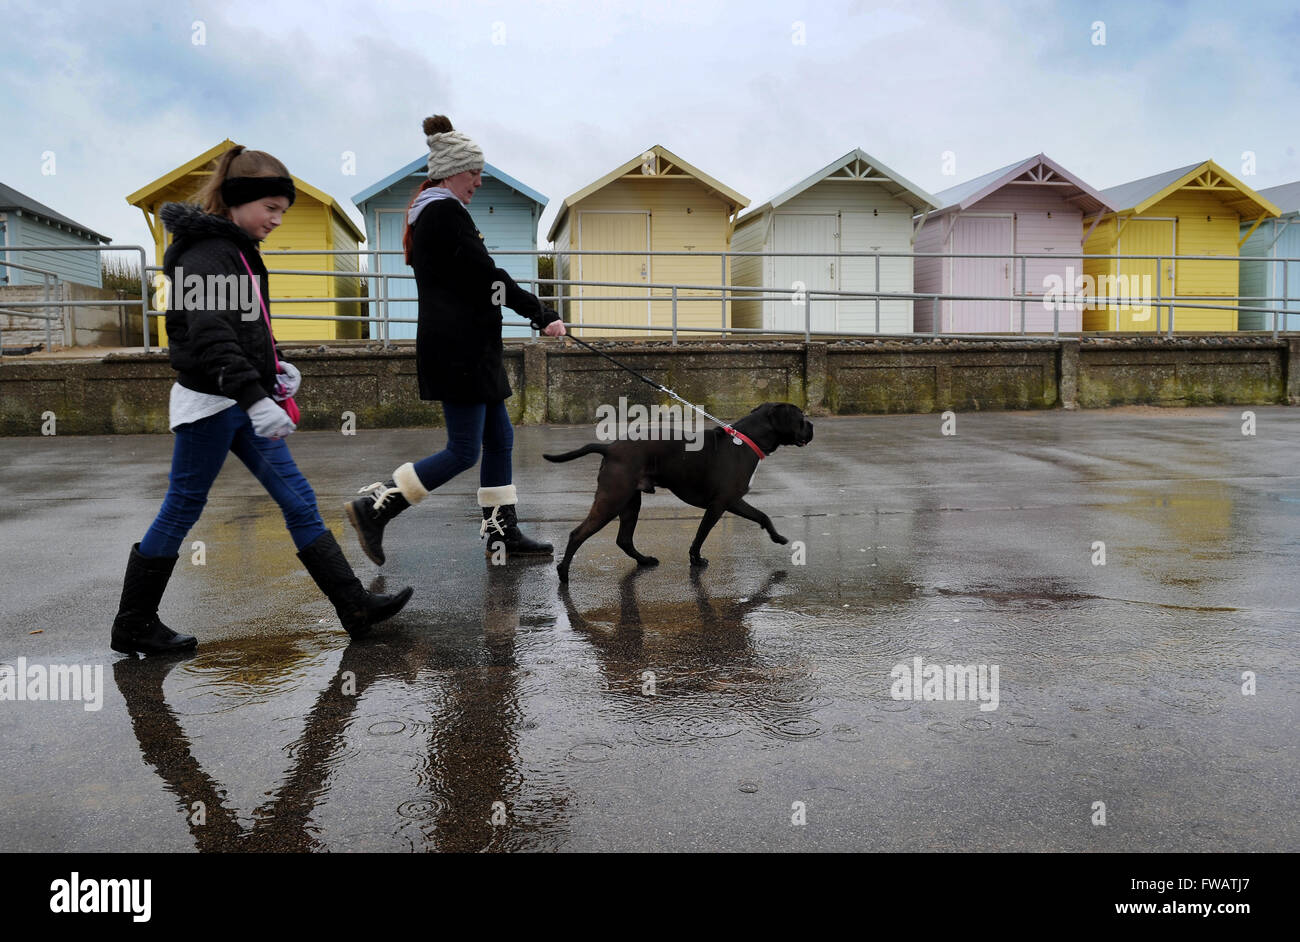 Fleetwood, Lancashire, UK. 2nd April, 2016. April showers put a dampener on the weekend walkers at Fleetwood, Lancashire. Picture by Paul Heyes, Saturday April 2, 2016. Credit:  Paul Heyes/Alamy Live News Stock Photo